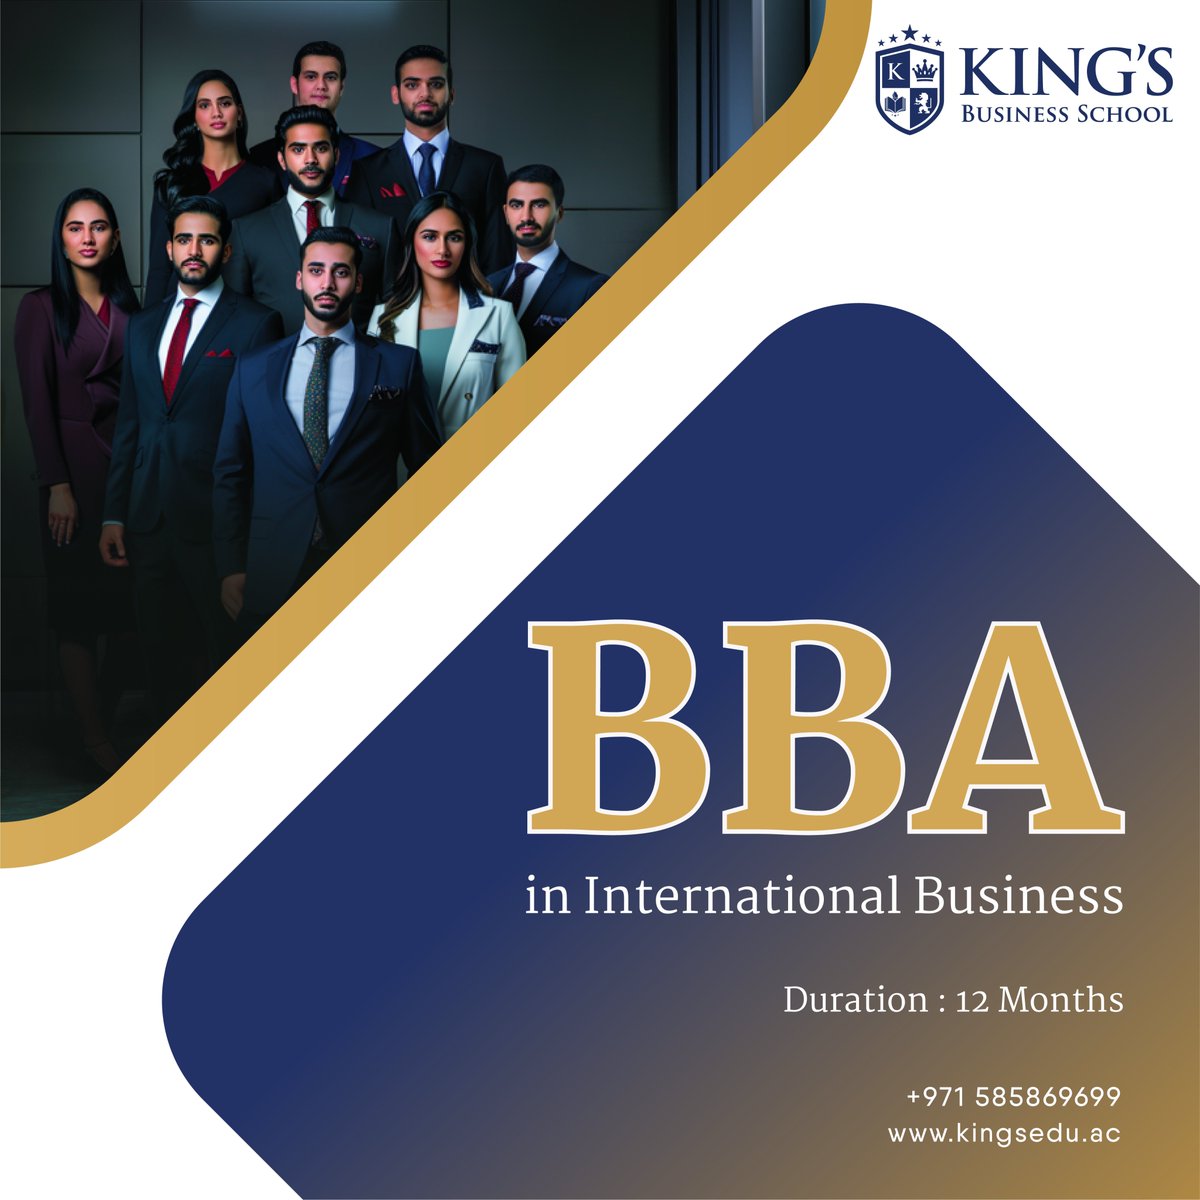 Our BBA in International Business degree, awarded by IPAC Business School, France just takes 12 months for you to venture into the world of business. Interested in knowing more?
Contact us: 971585869699
.
.
#bachelorsdegree #BBA #internationalbusiness  #kingsbusinessschool